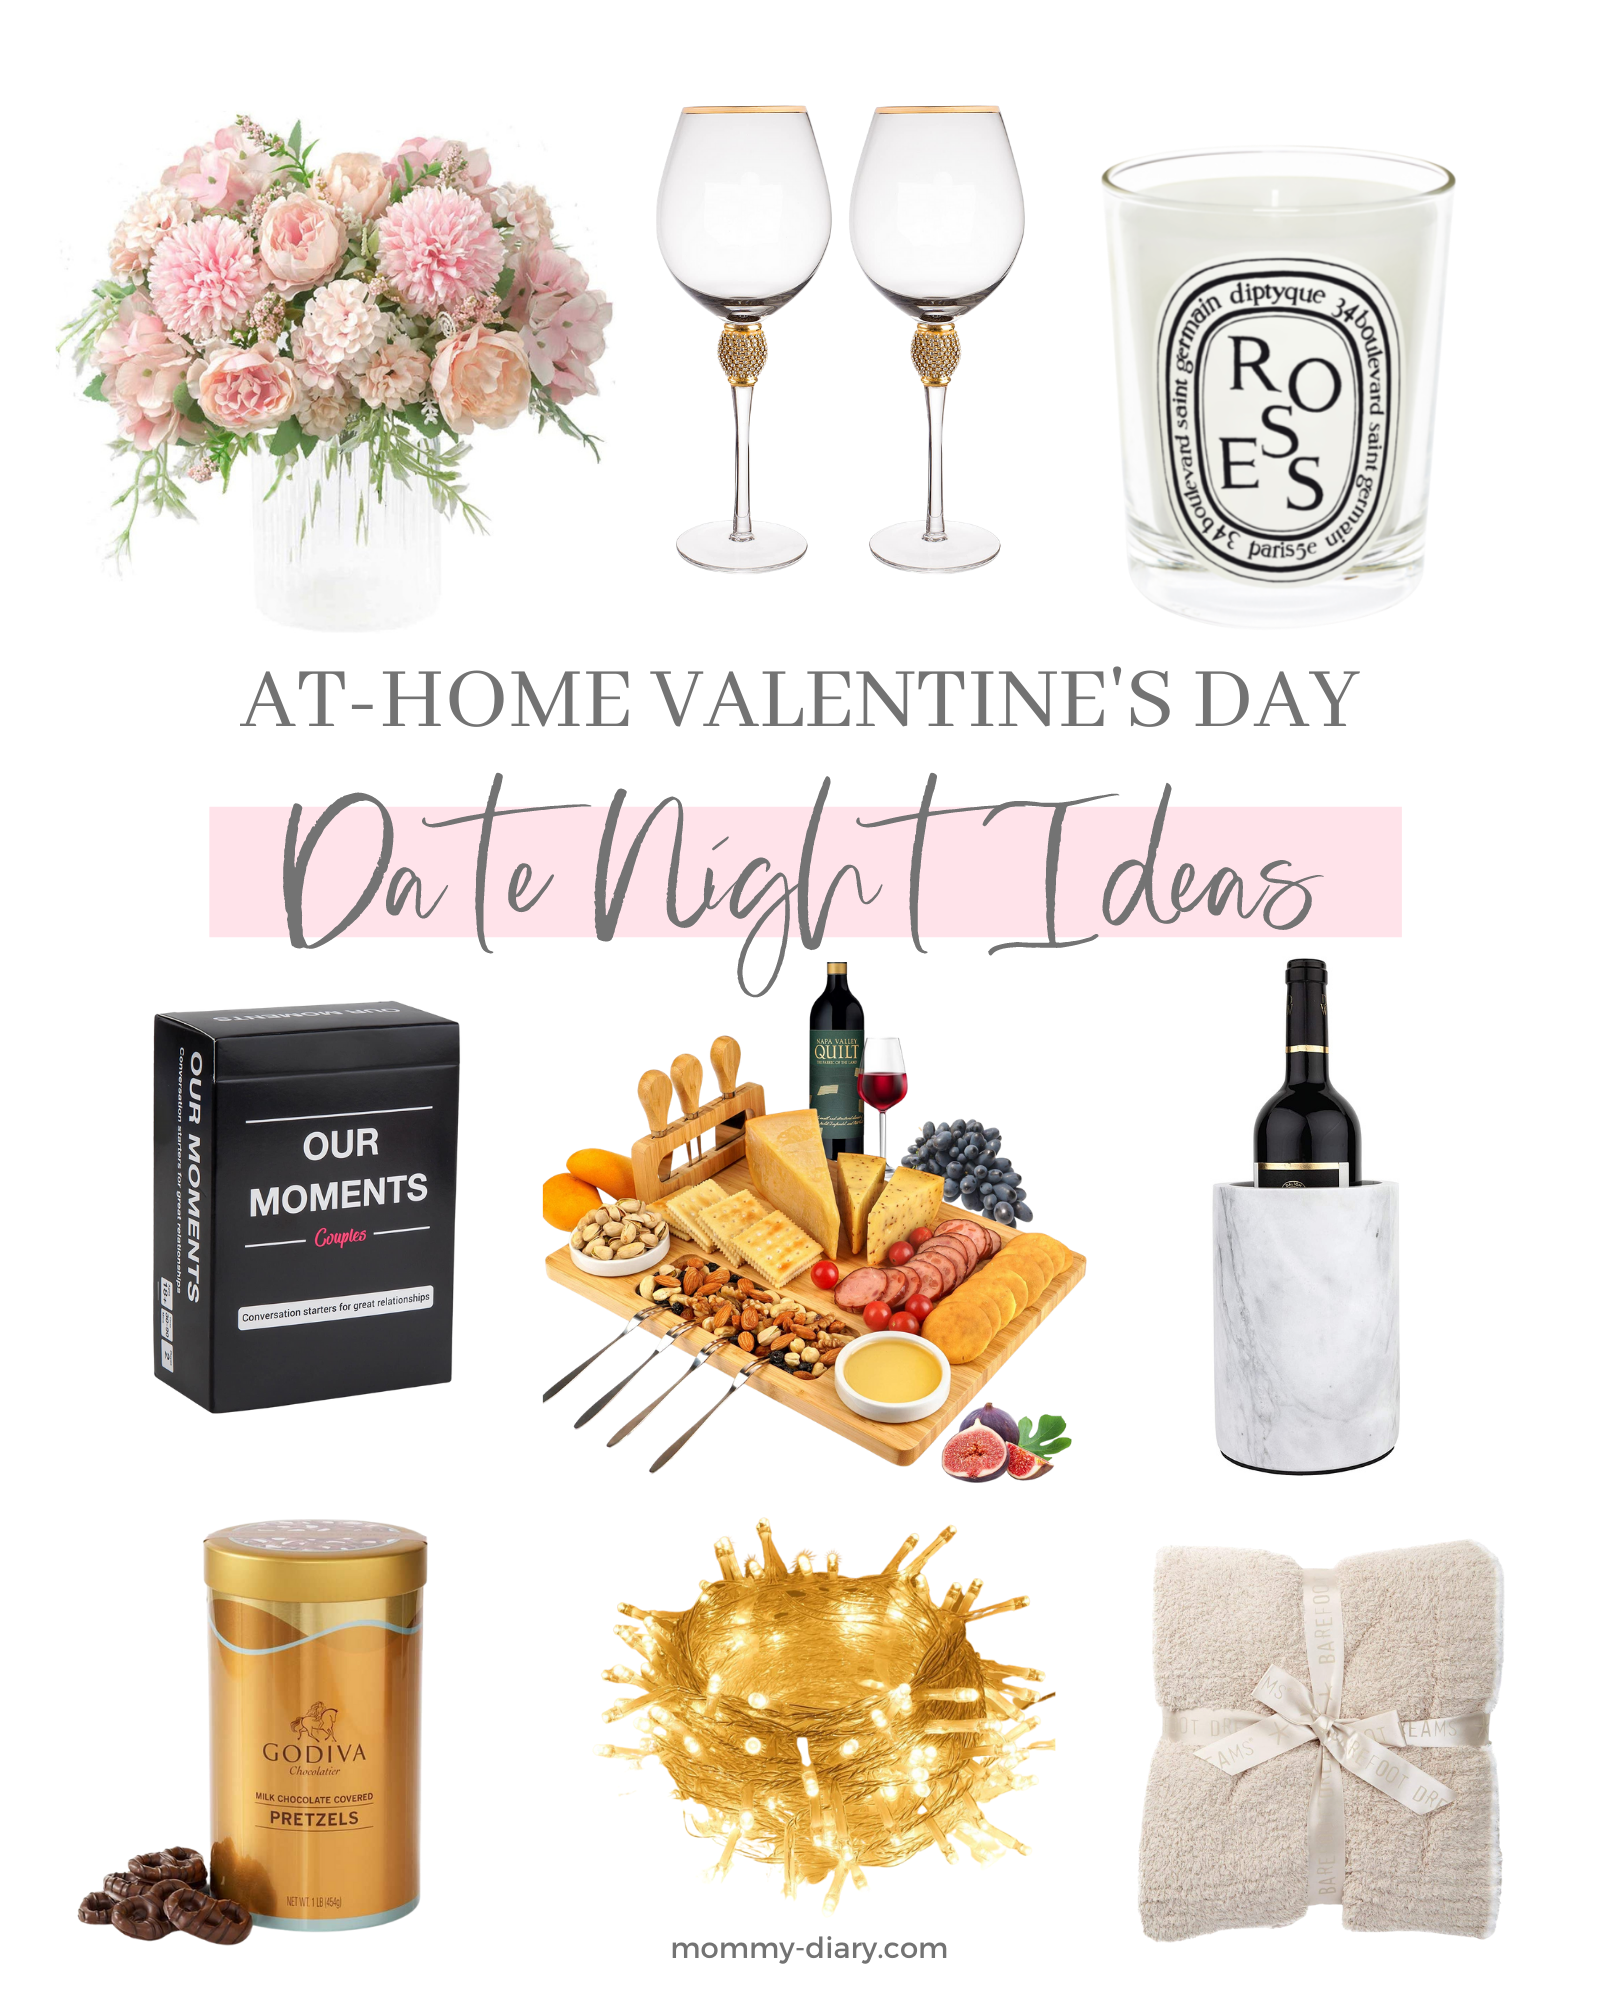 At-Home Valentine's Day Date Night Ideas